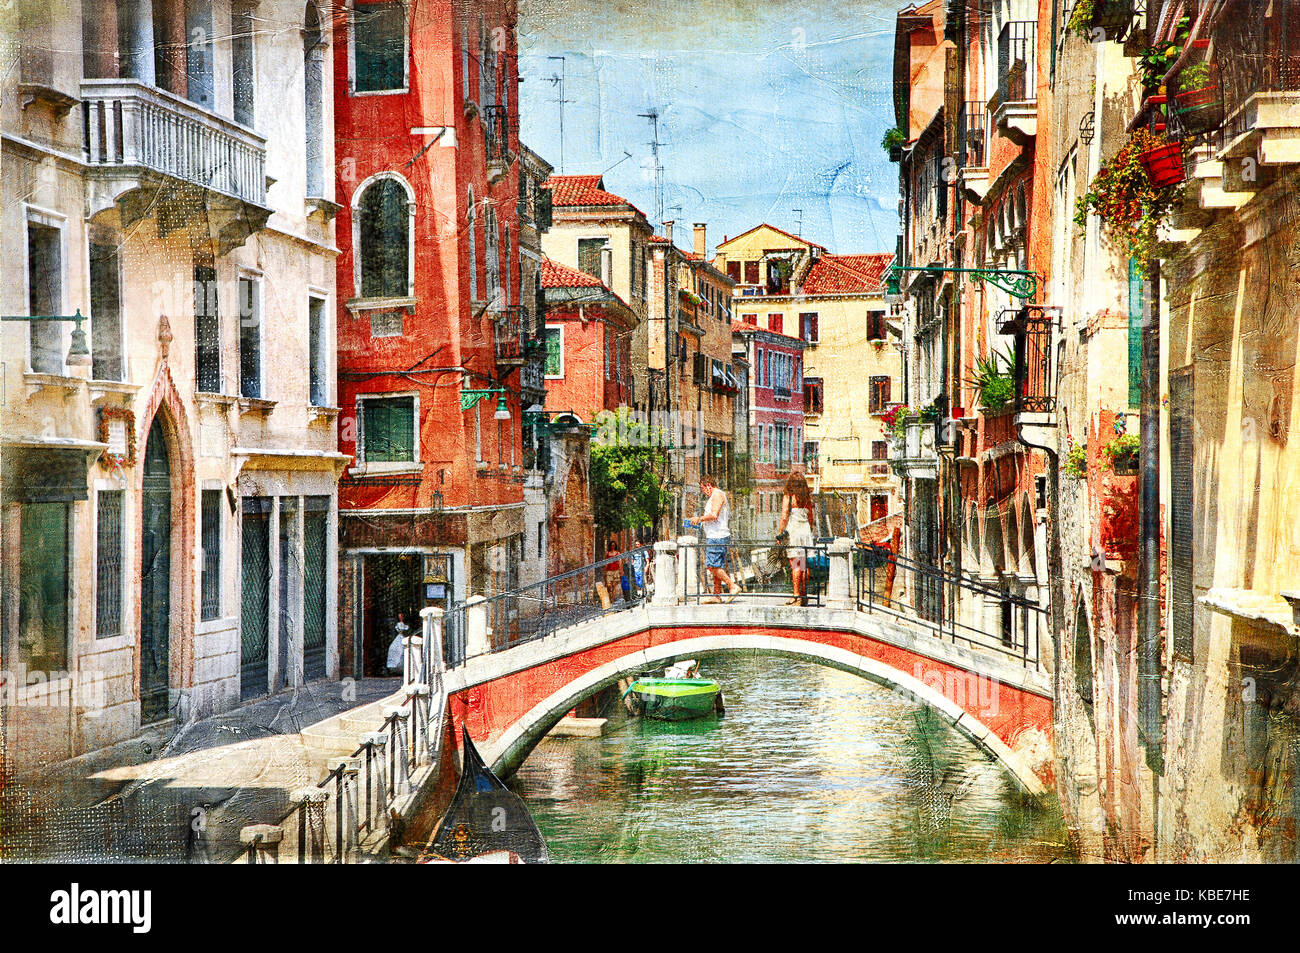 Romantic beautiful Venice - artistic picture in painting style Stock Photo